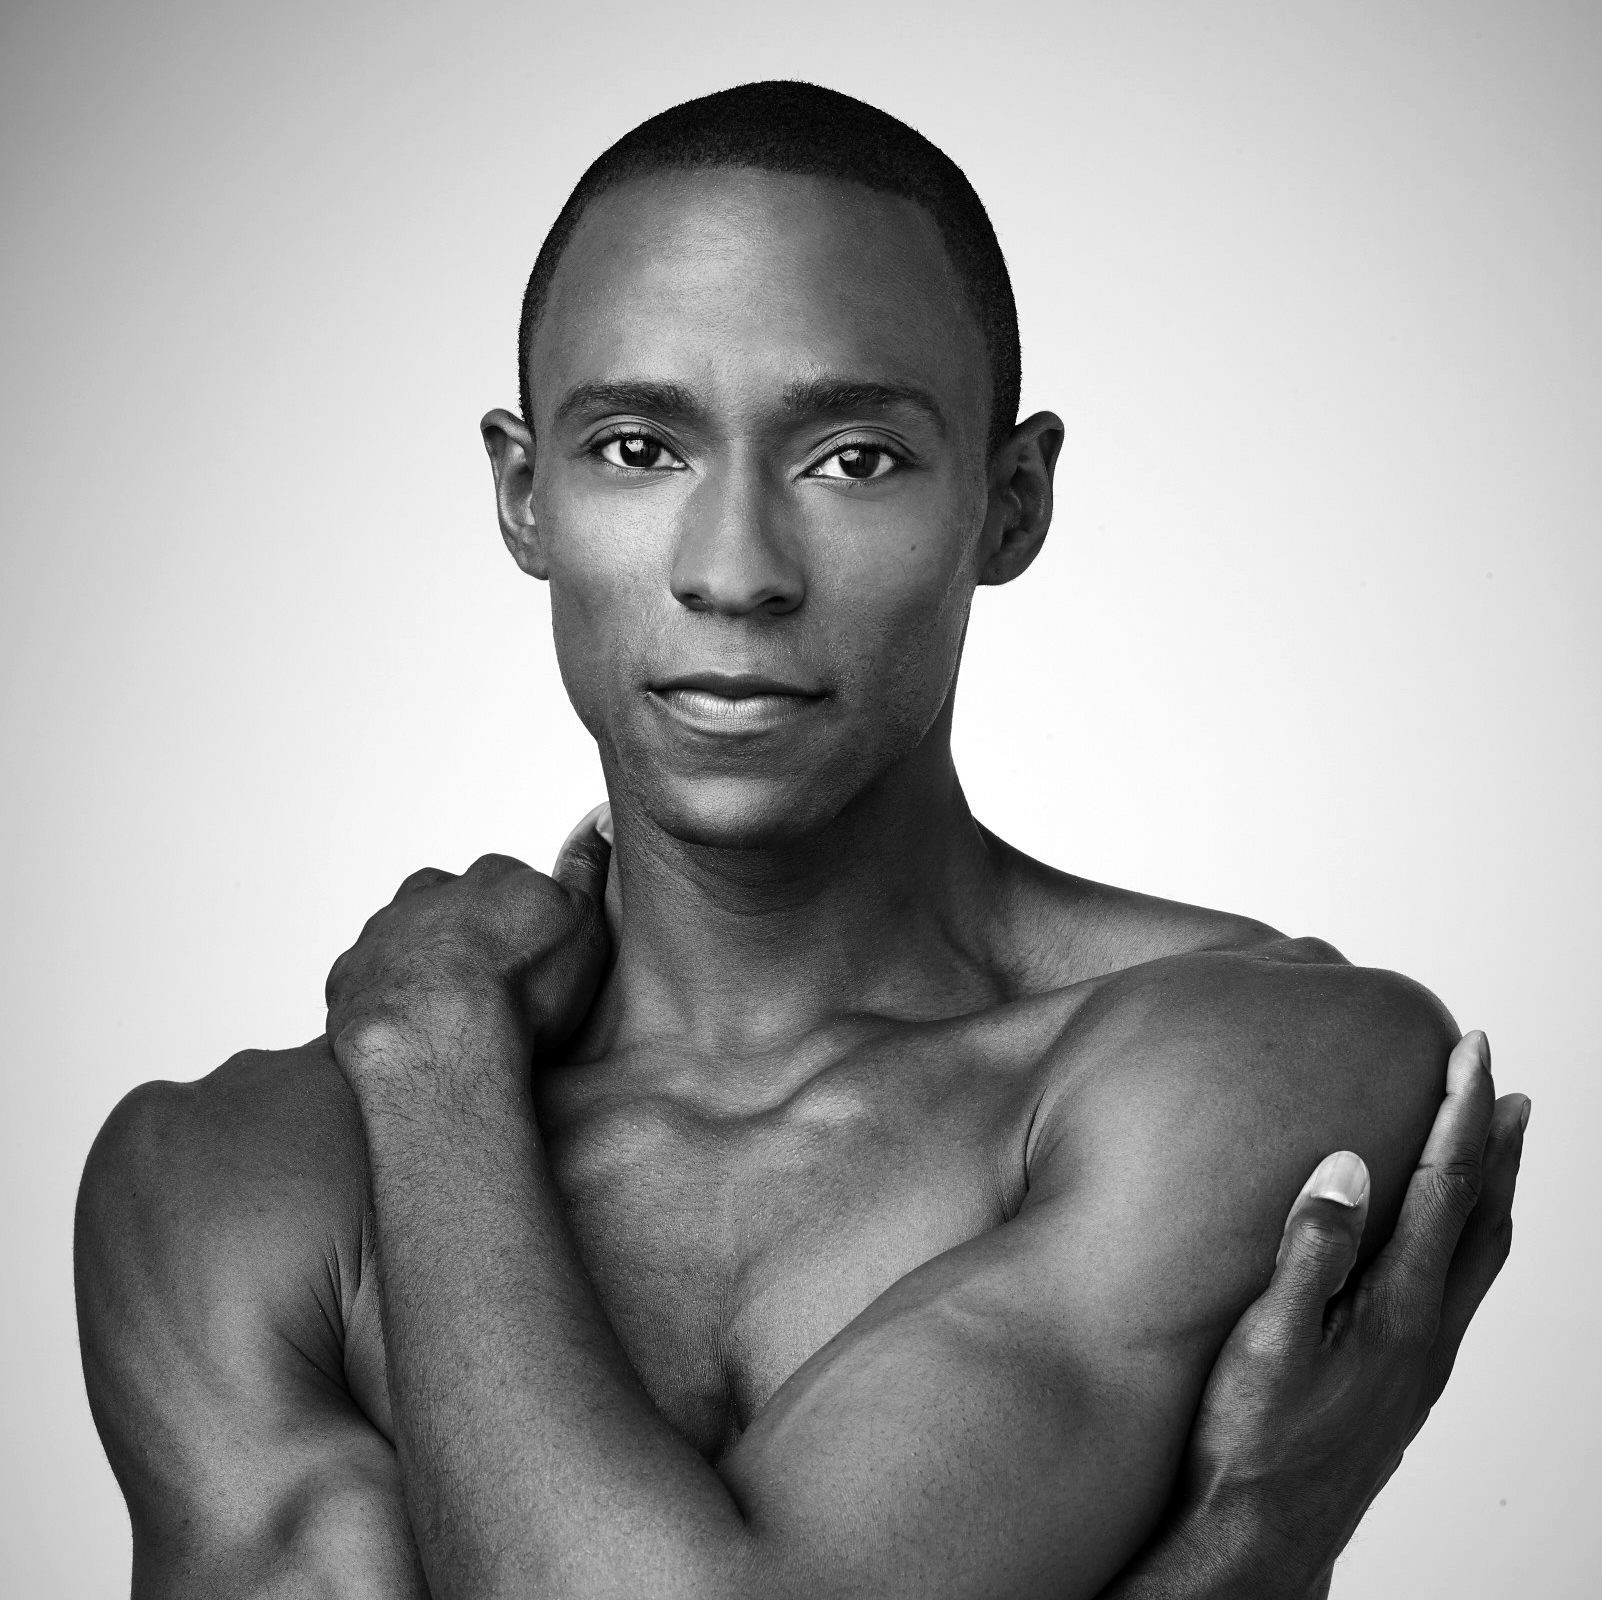 Alvin Ailey American Dance Theater’s Samuel Lee Roberts. Photo by Andrew Eccles